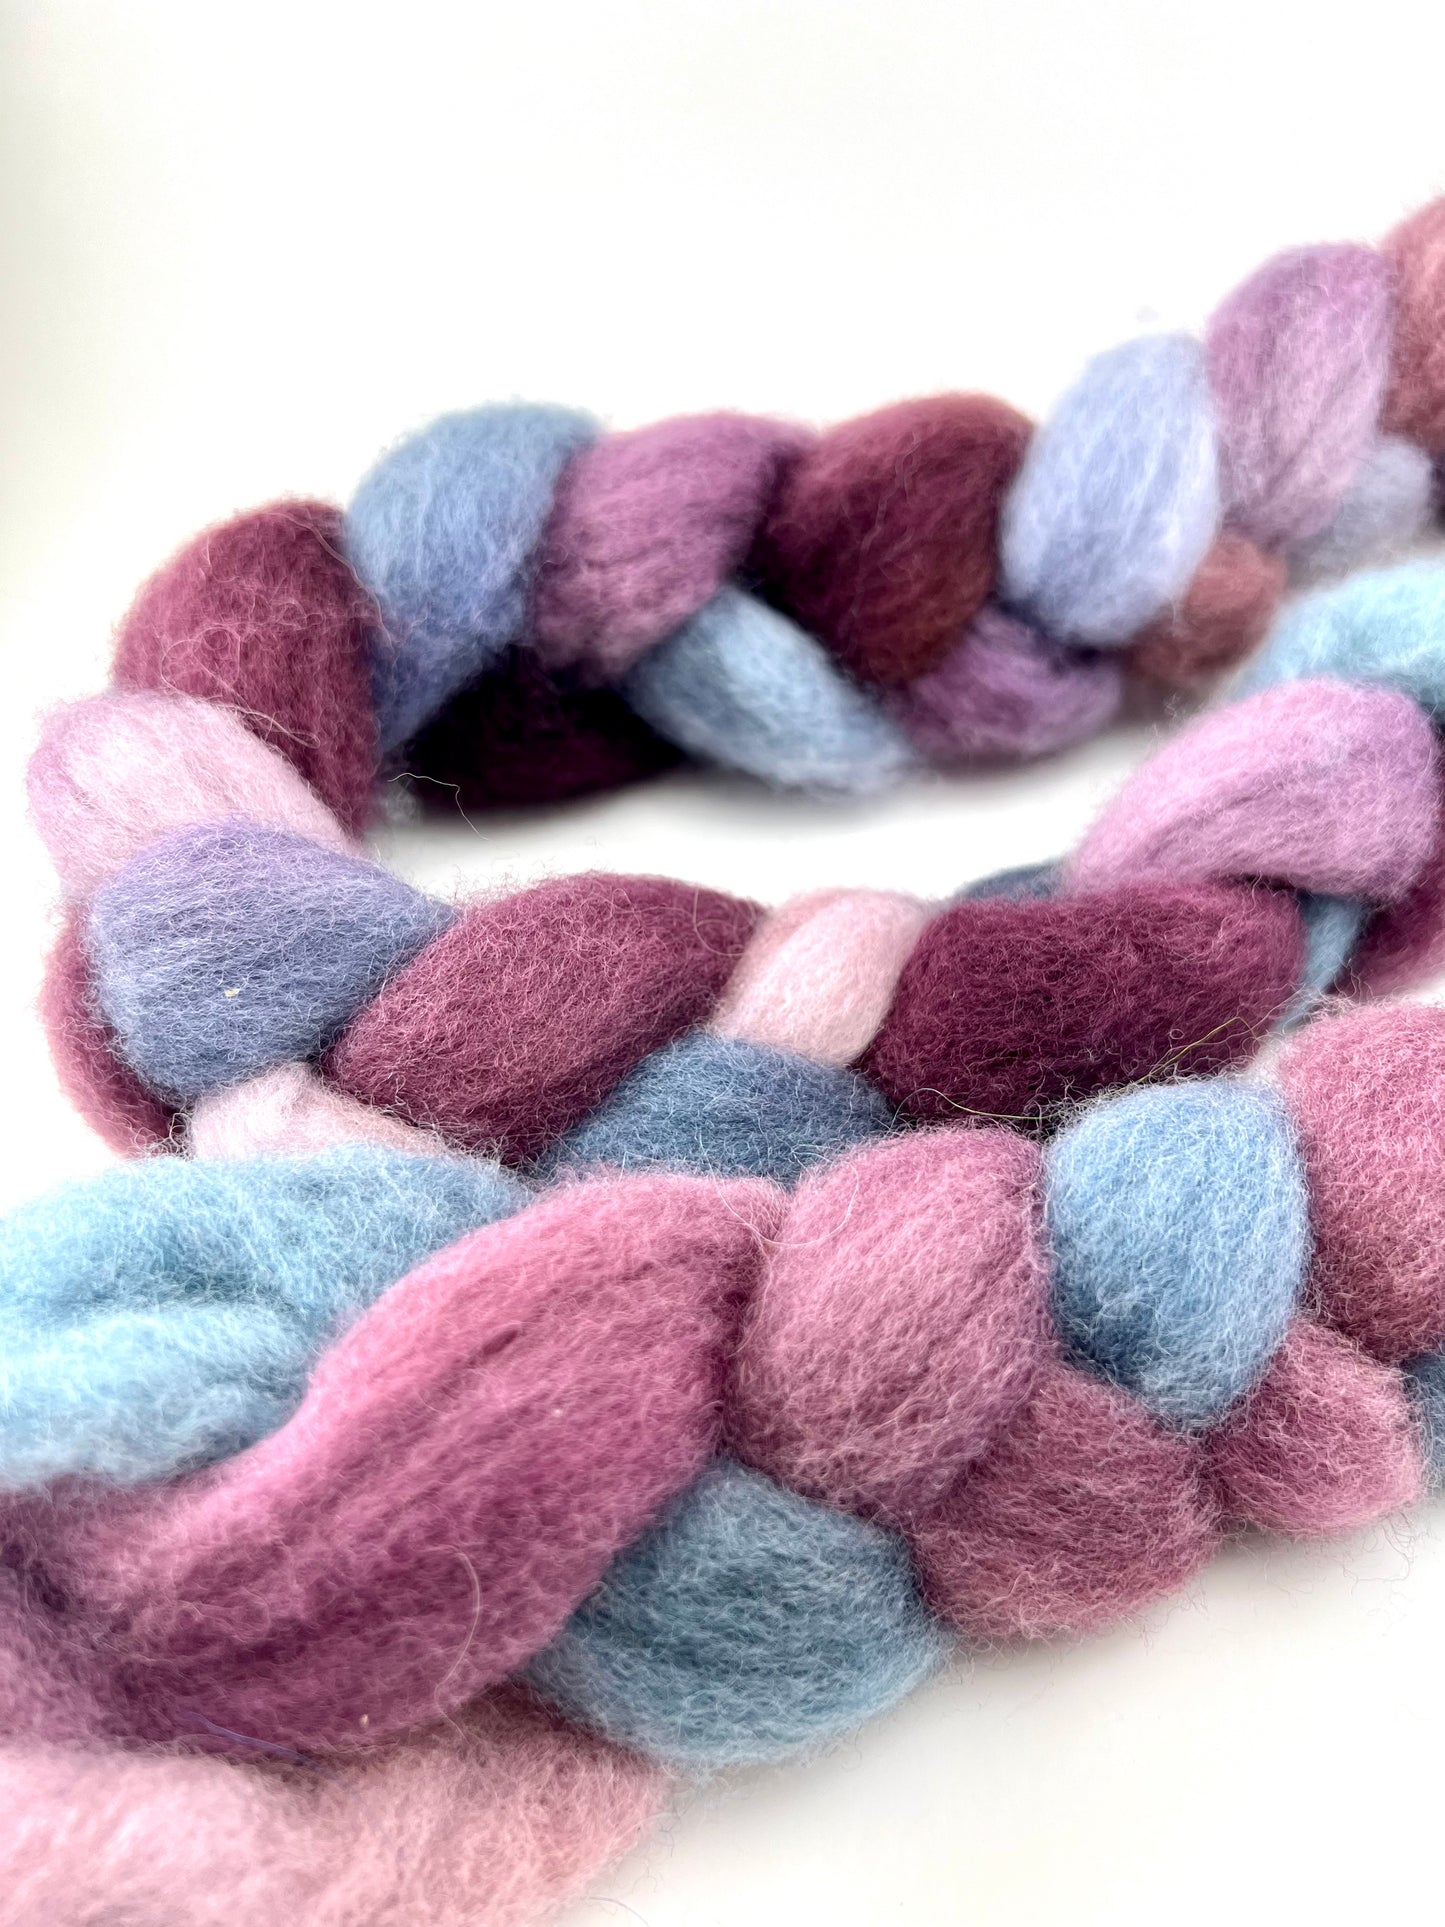 PURPLES BLUES MAUVES Hand Dyed Spinning Fibre Purple Blue Corriedale Top Non Superwash